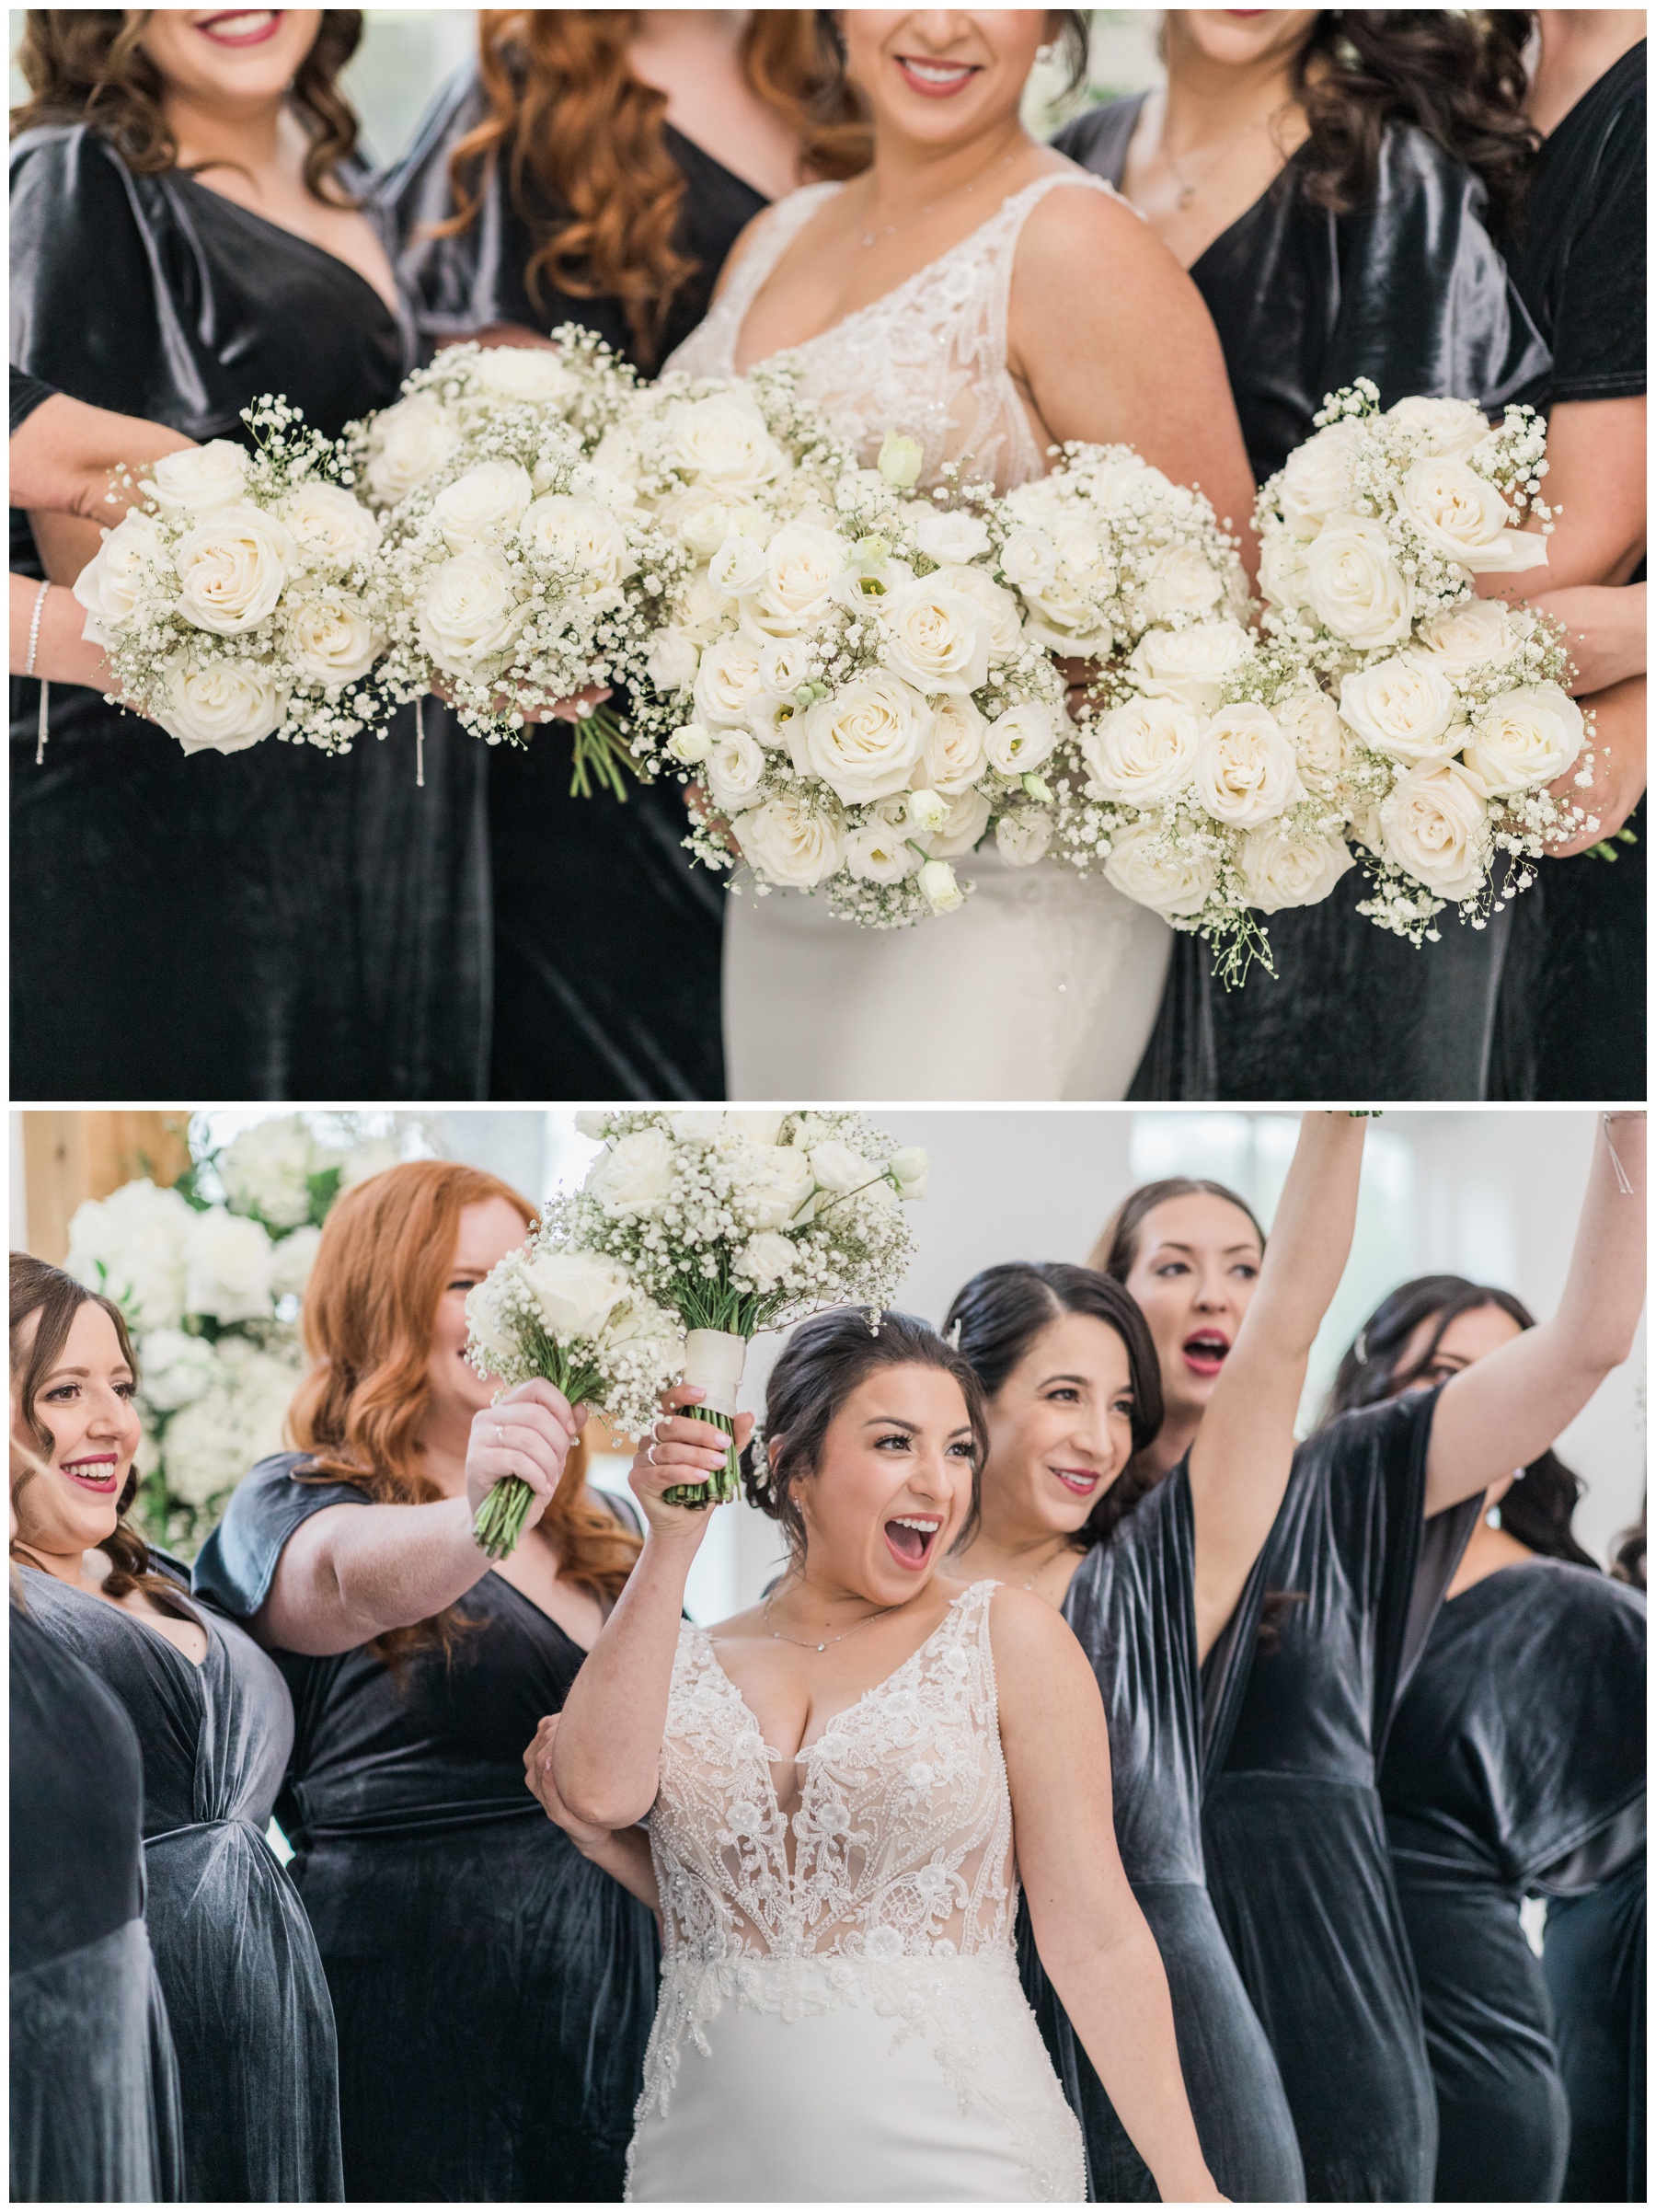 Bride holding a bouquet filled with white roses and baby's breath